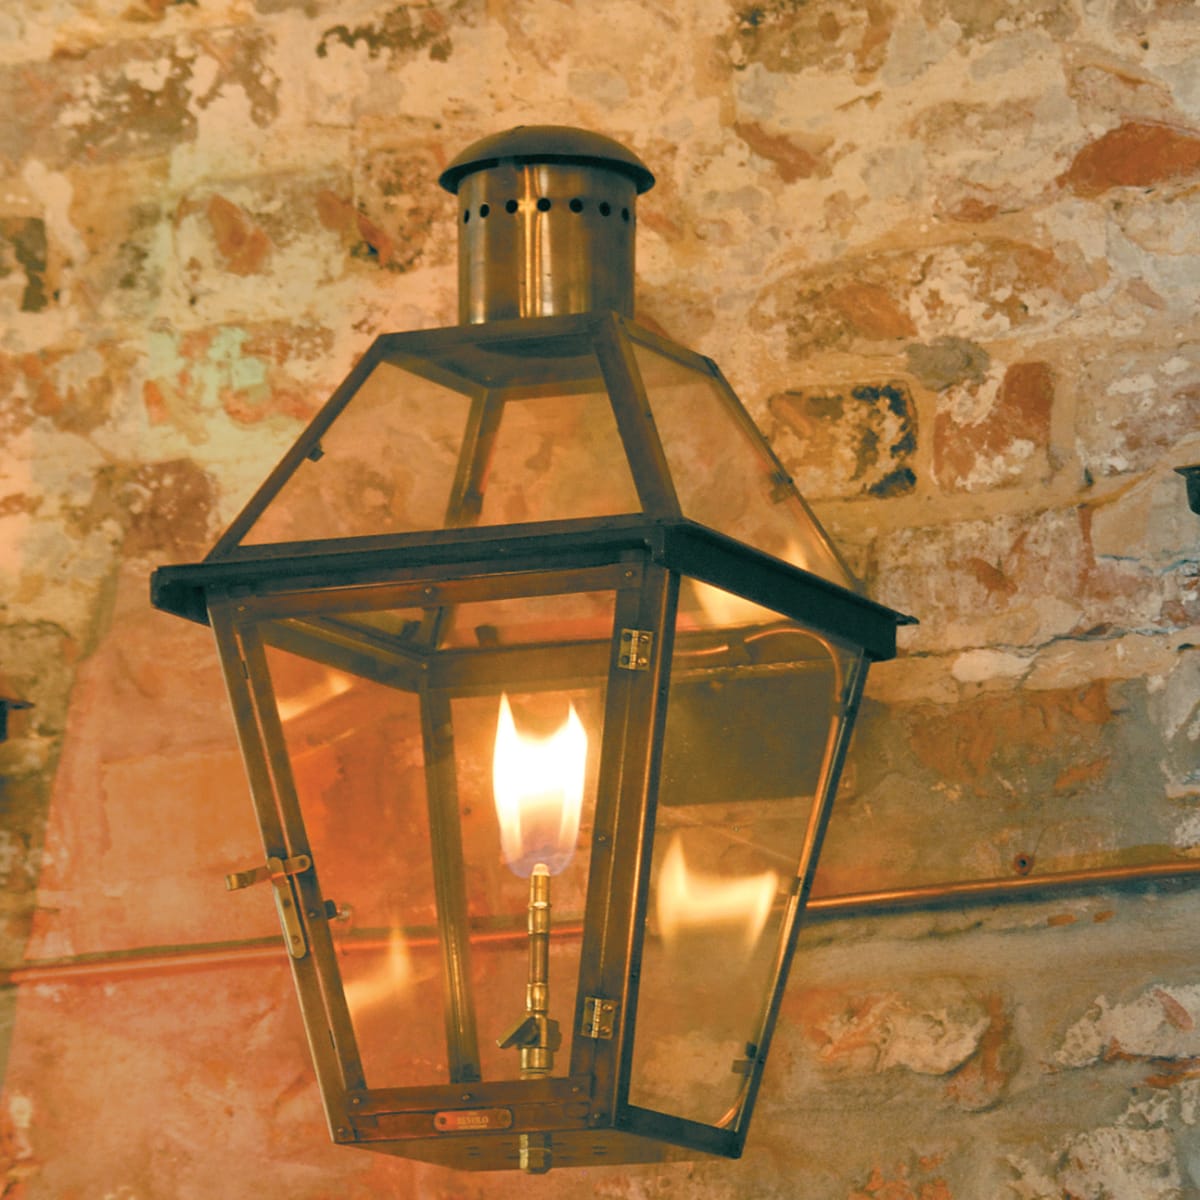 gas lighting a radiant history